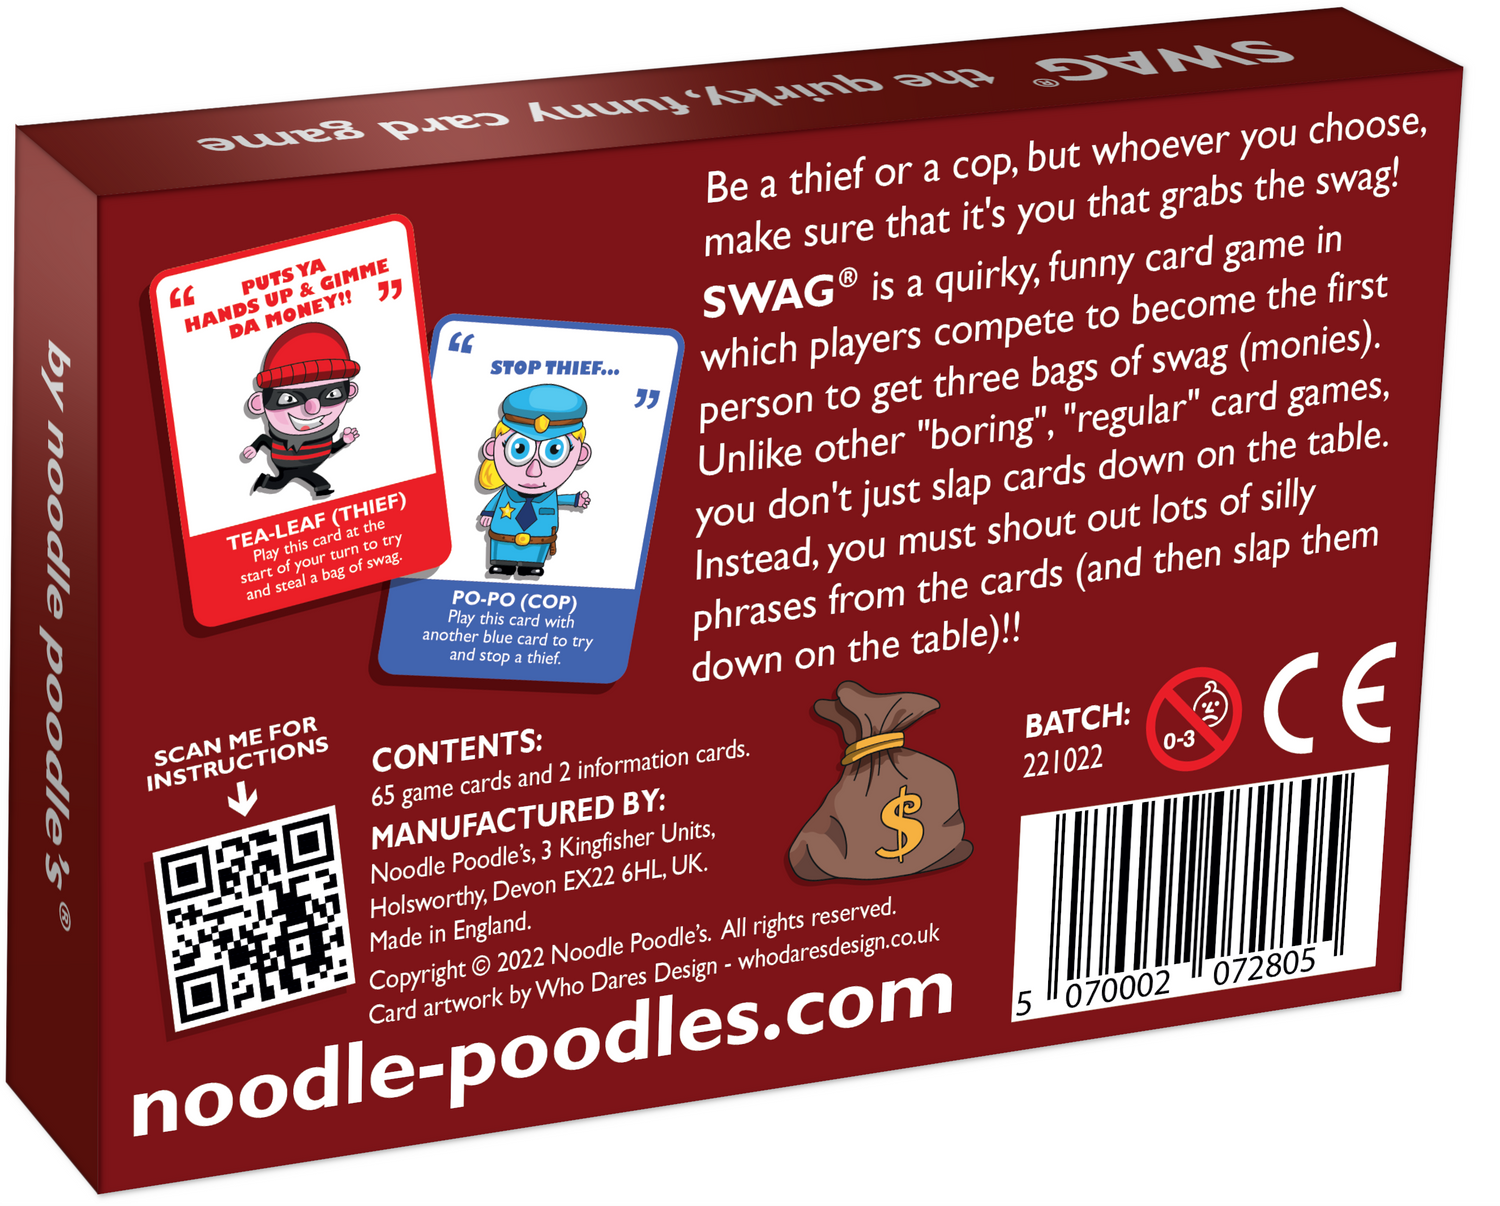 SWAG: A Quirky Card Game for Competitive Fun and Silly Shouts